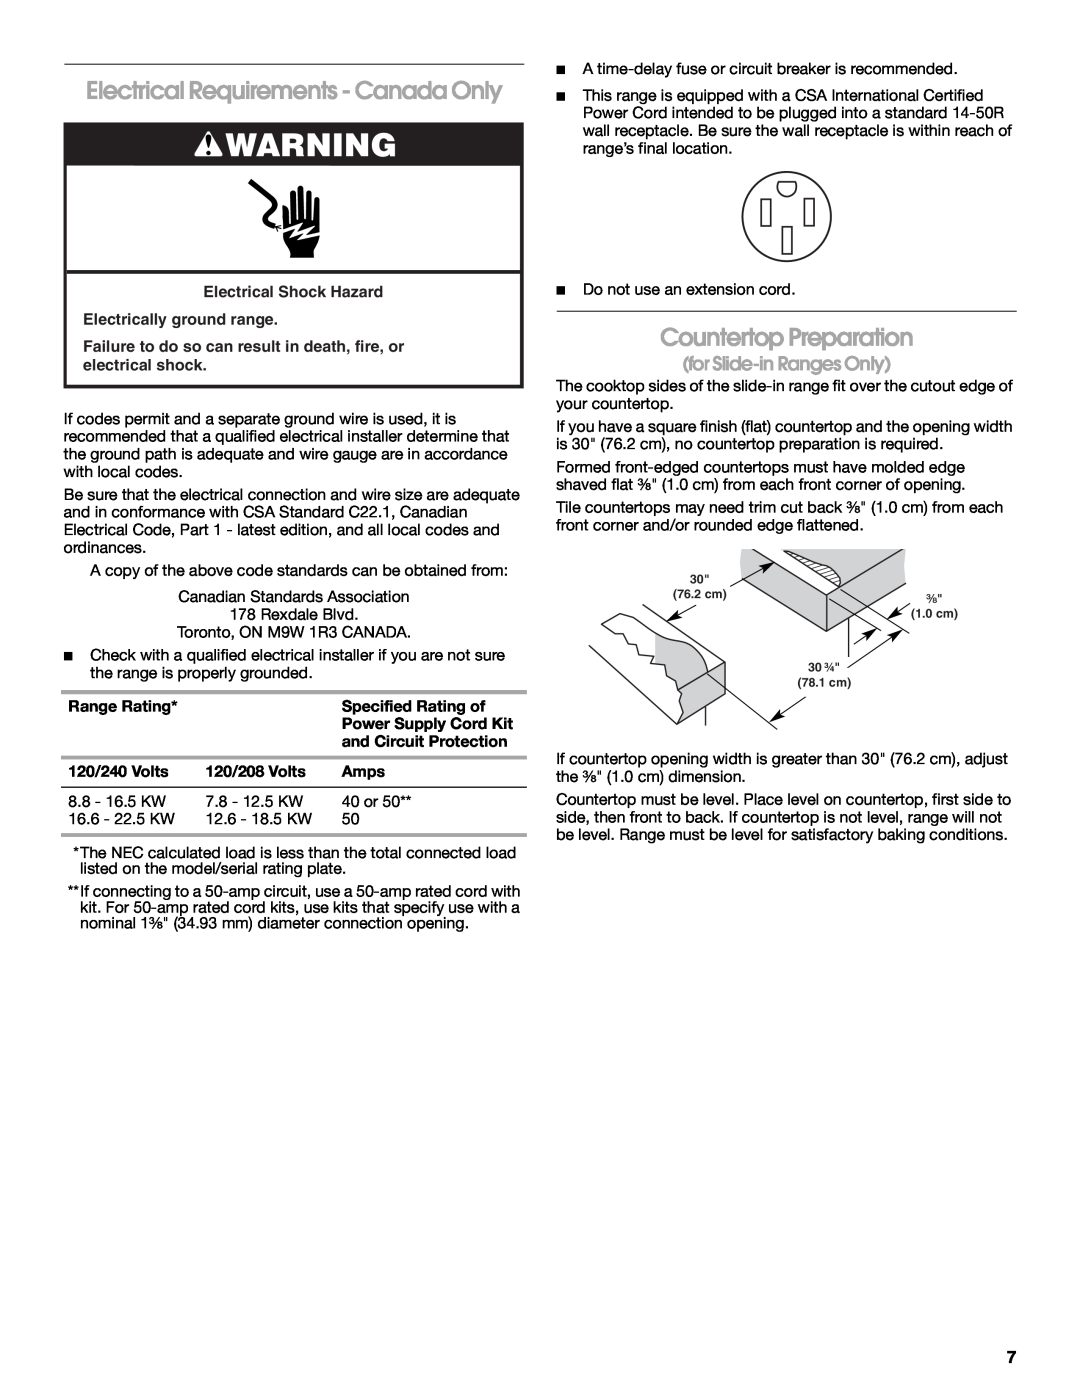 Whirlpool 9762035A Electrical Requirements - Canada Only, Countertop Preparation, for Slide-in Ranges Only 